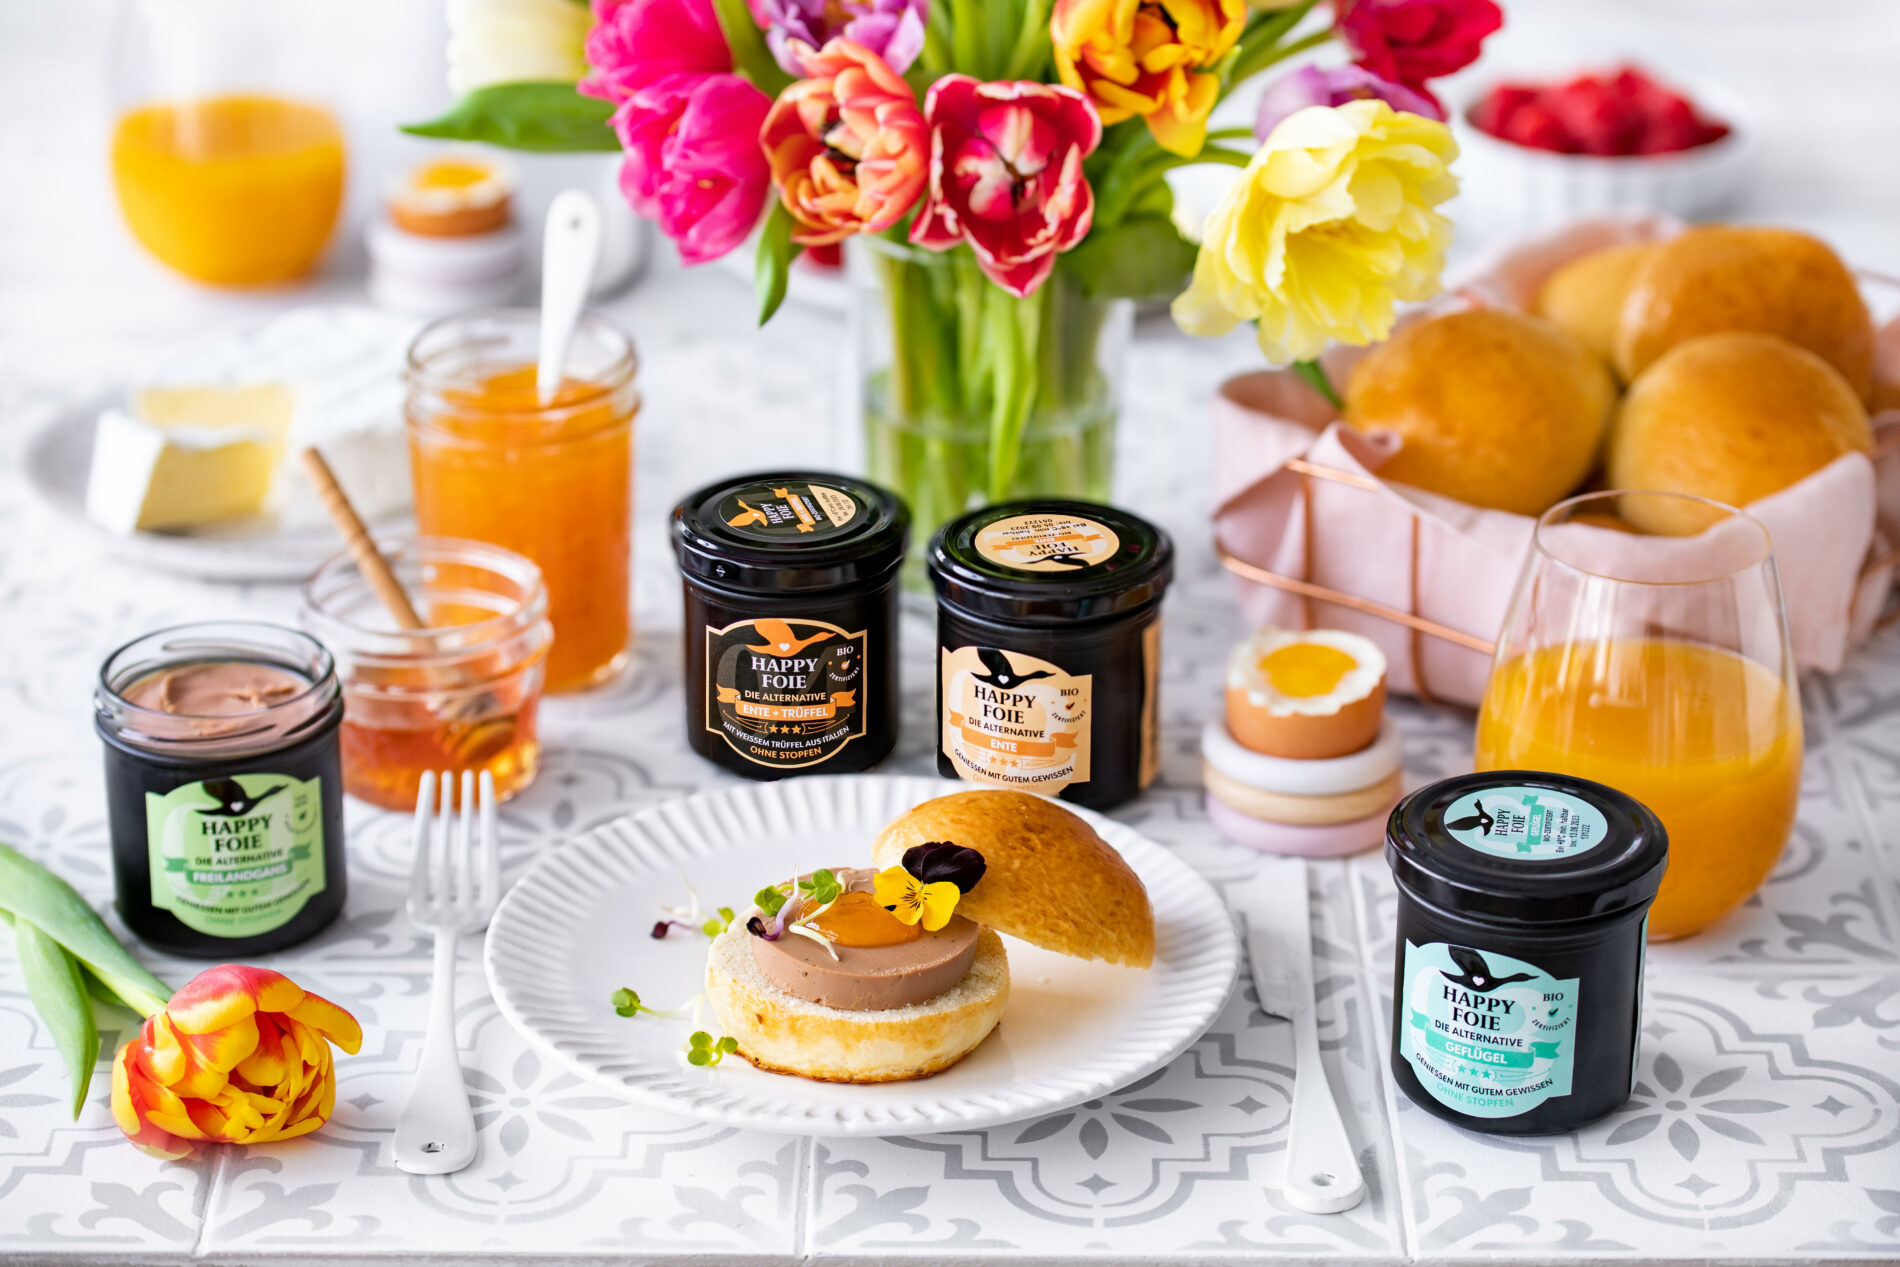 Foie gras products on a bright brunch table with flowers